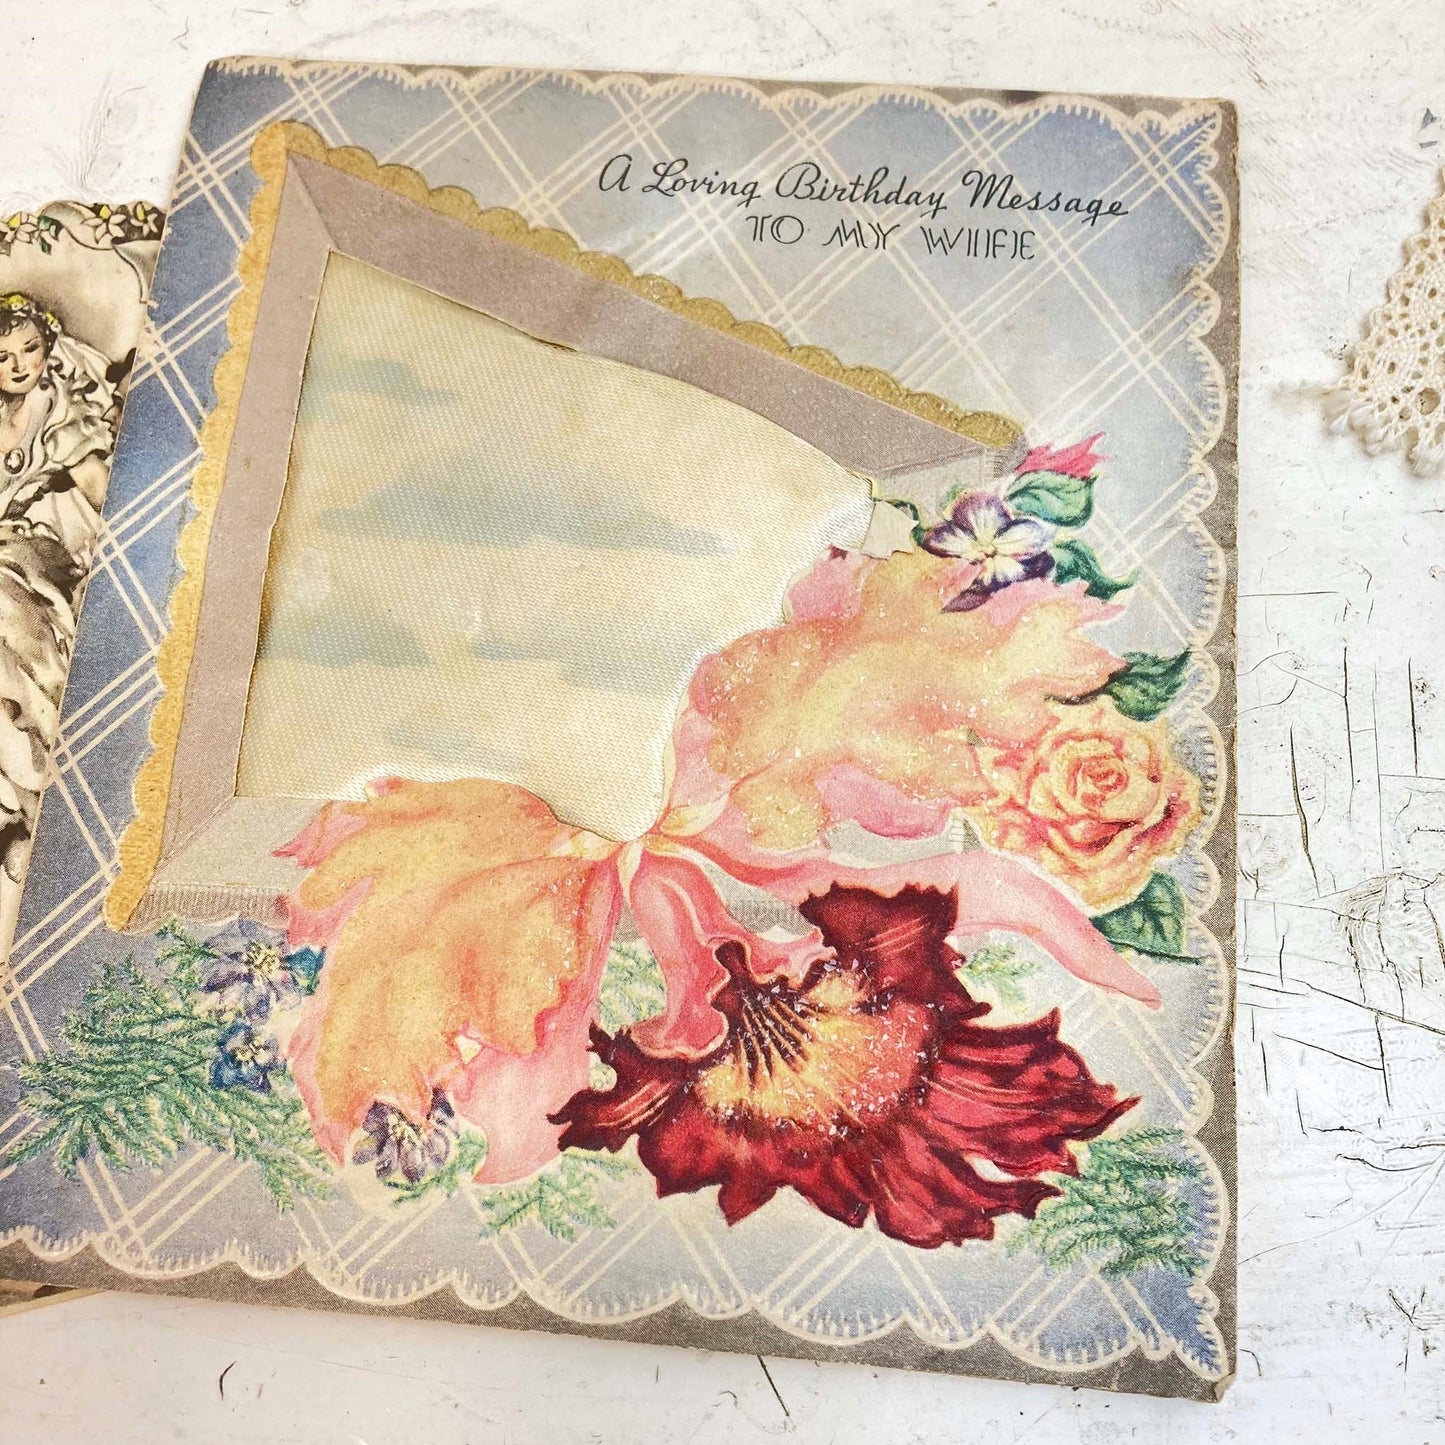 Antique Greeting Cards, Mother's Day, Anniversary, Ephemera Lot, Junk Journal Supplies - set of 6